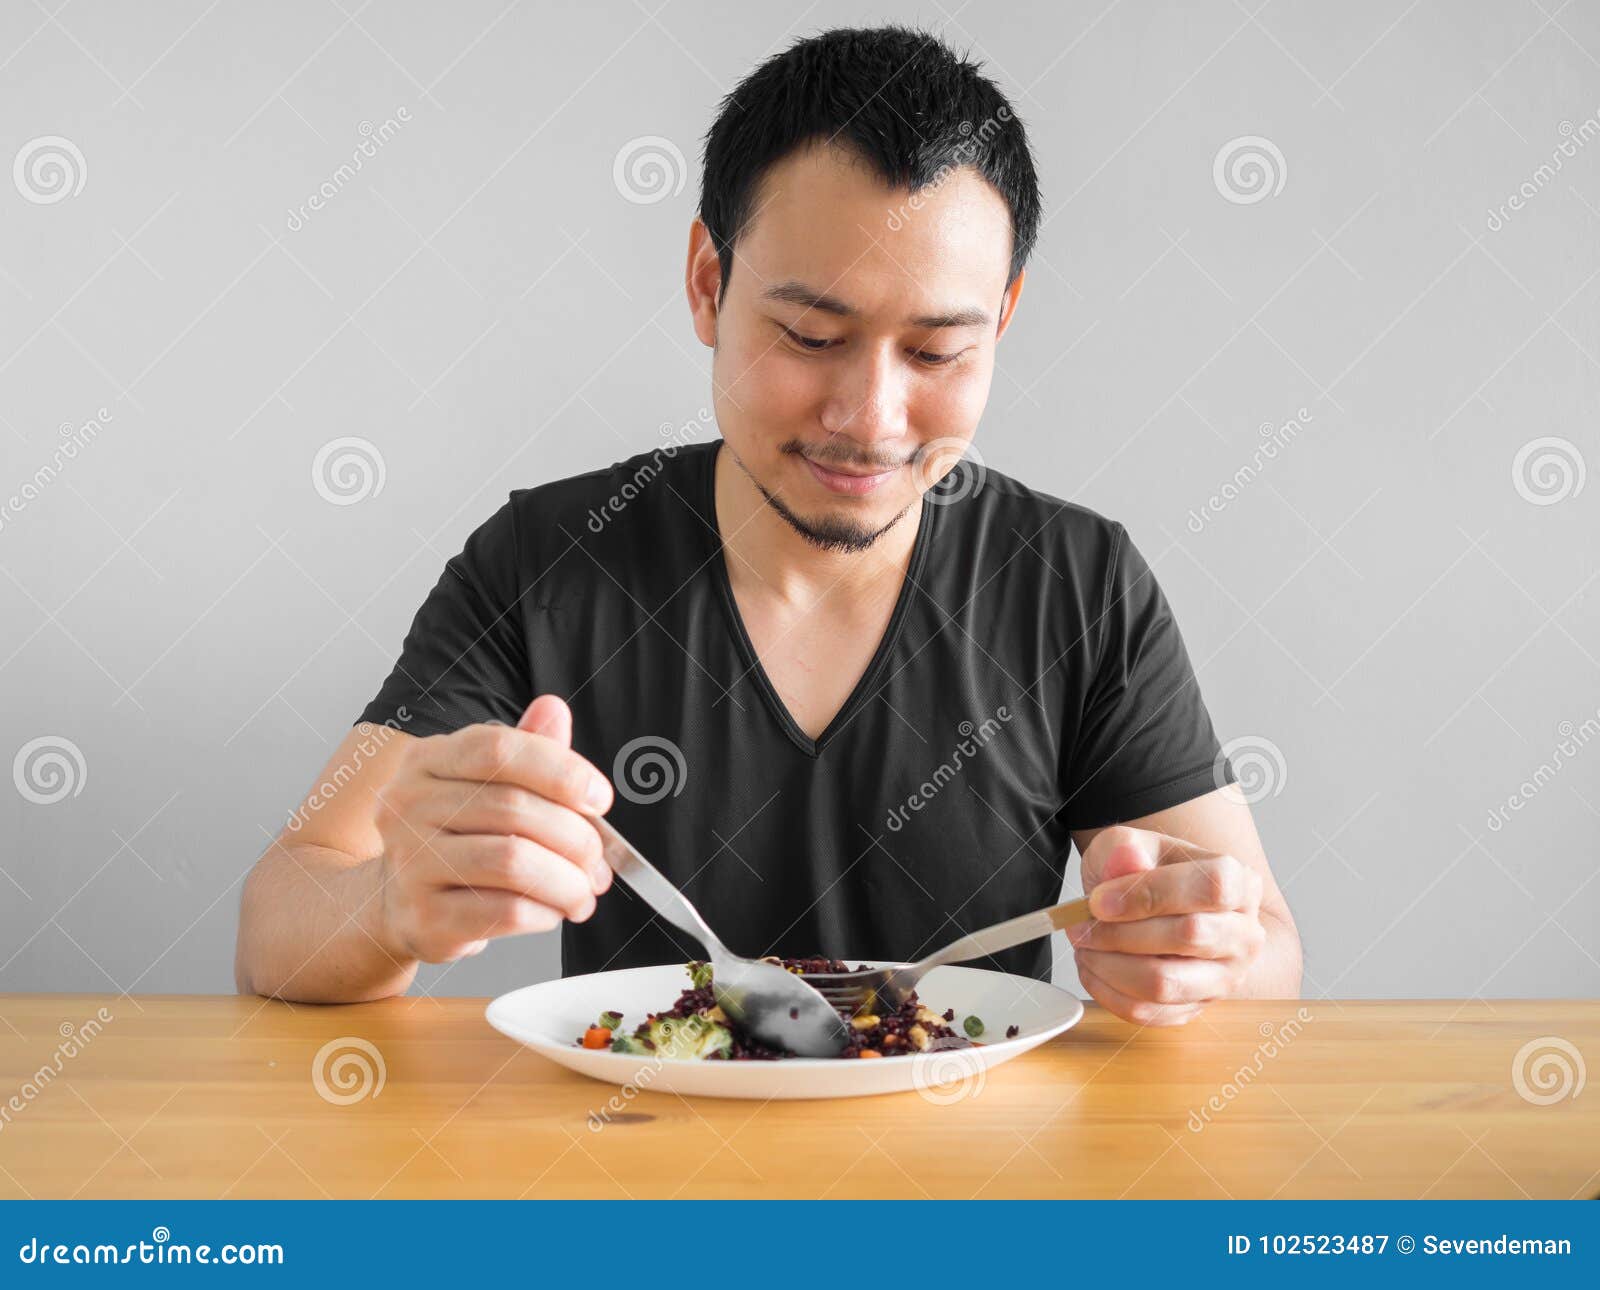 Man eats healthy food. stock image. Image of smiling - 102523487